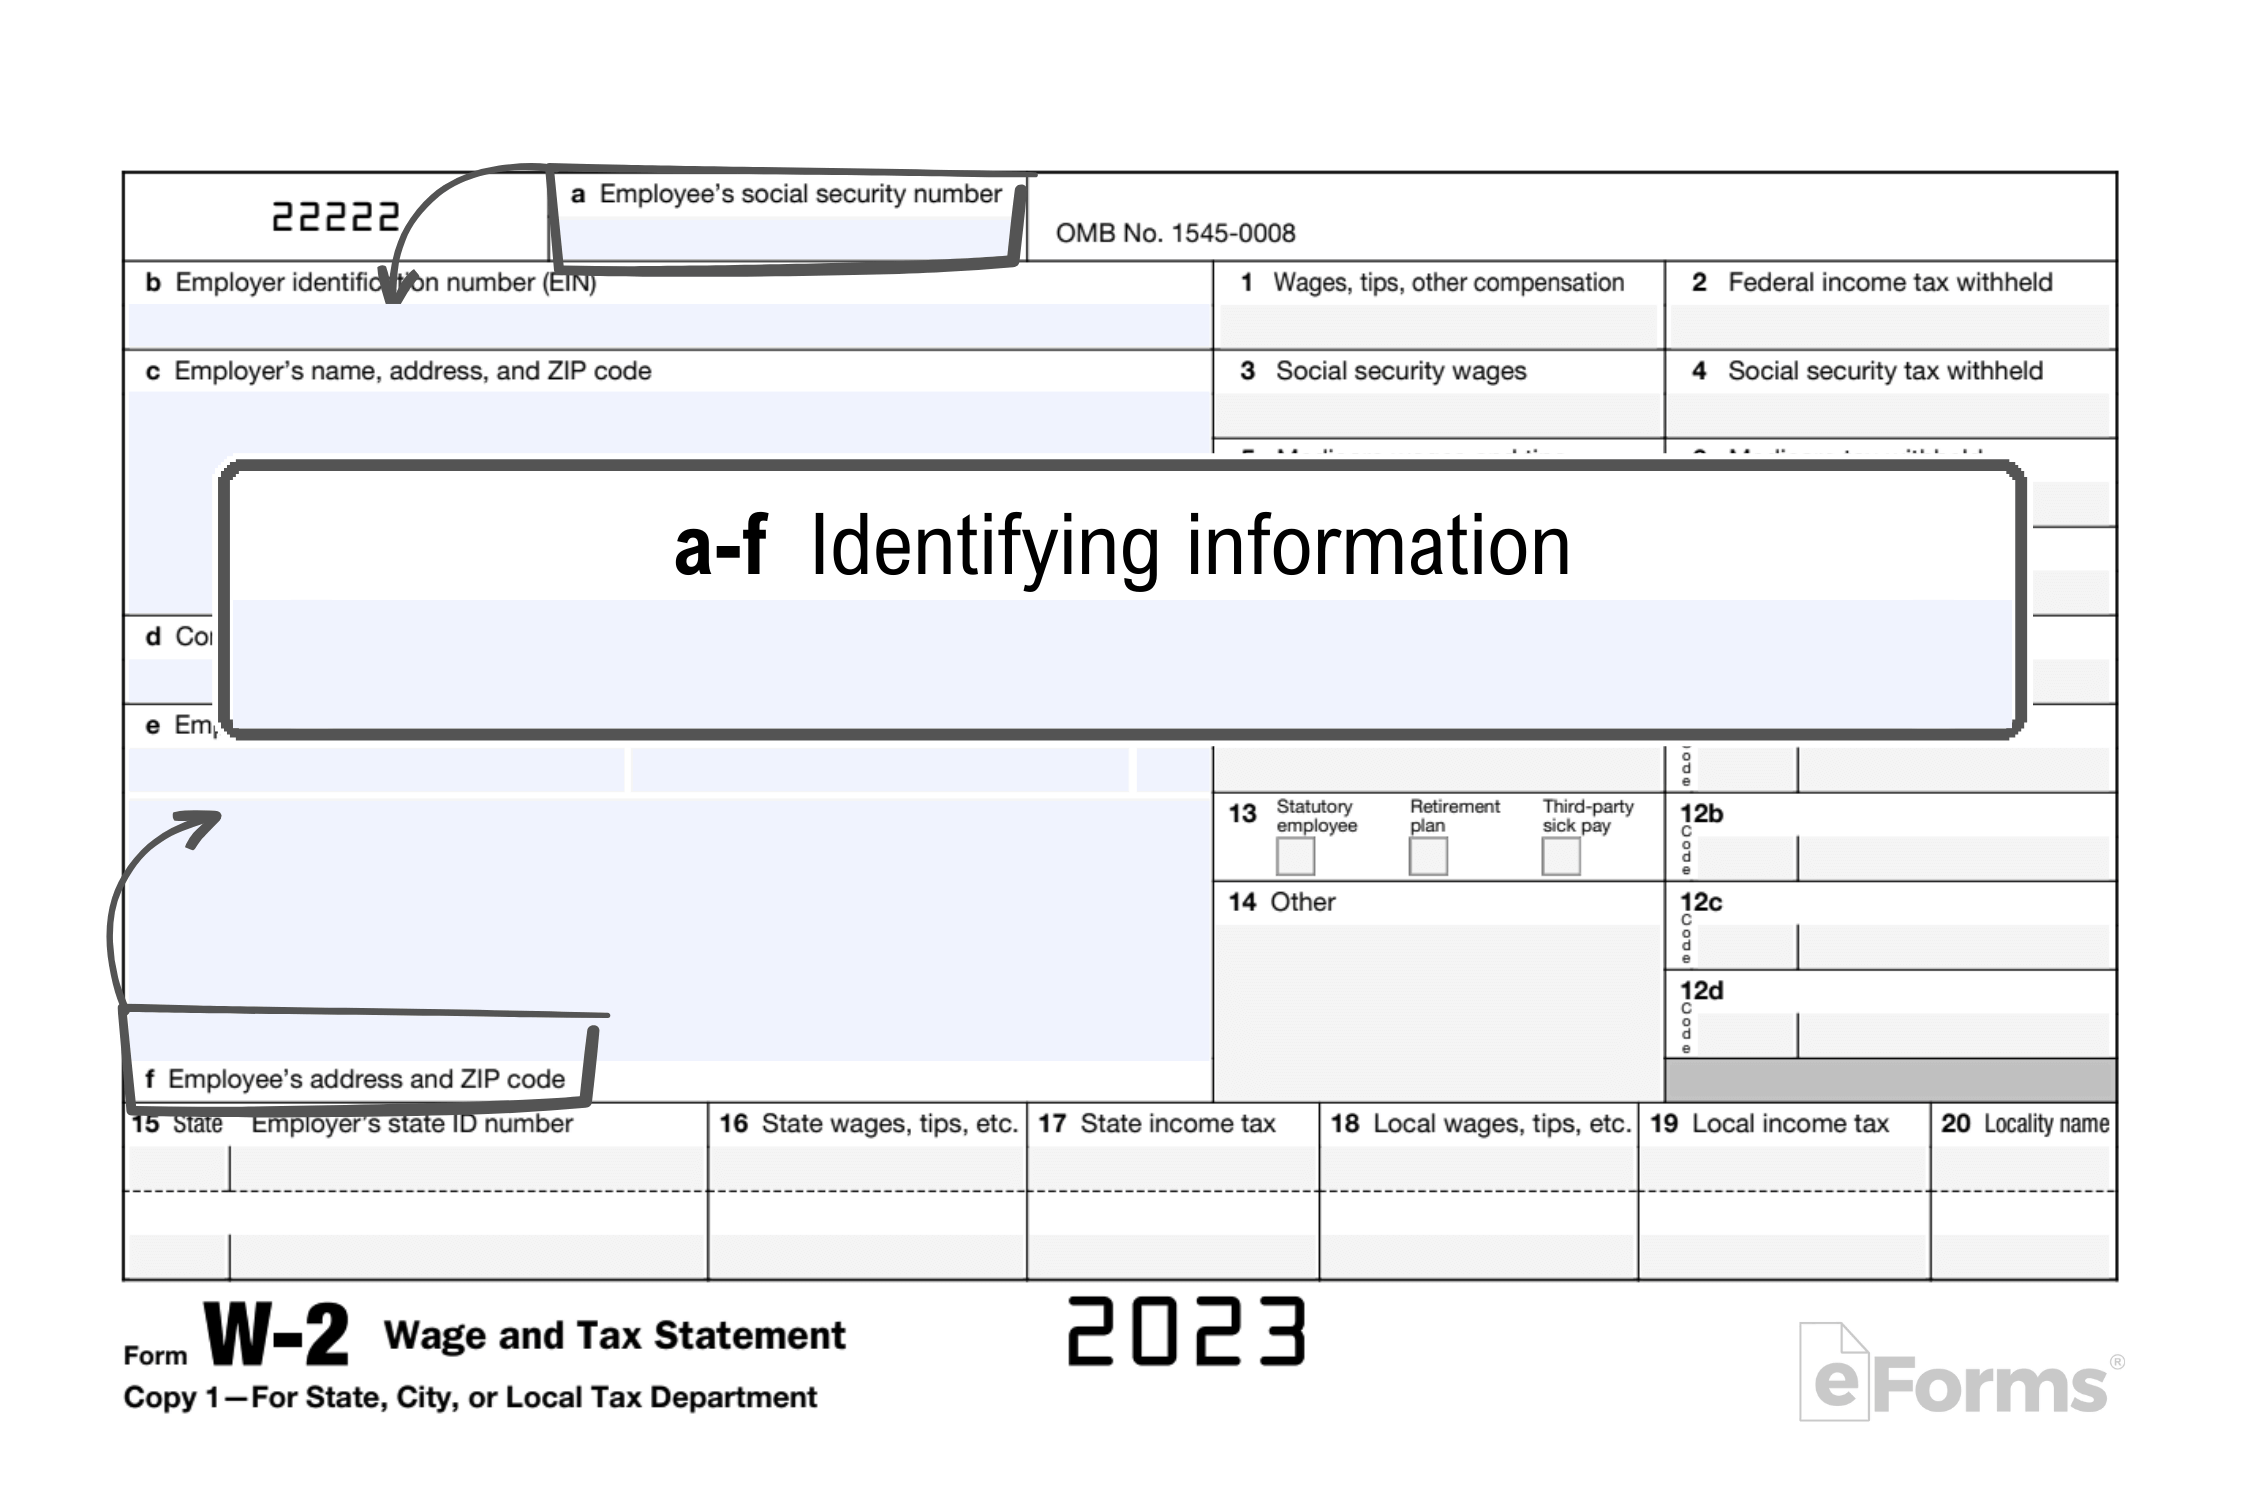 Free Irs Form W-2 | Wage And Tax Statement - Pdf – Eforms throughout Box 2 W2 Form